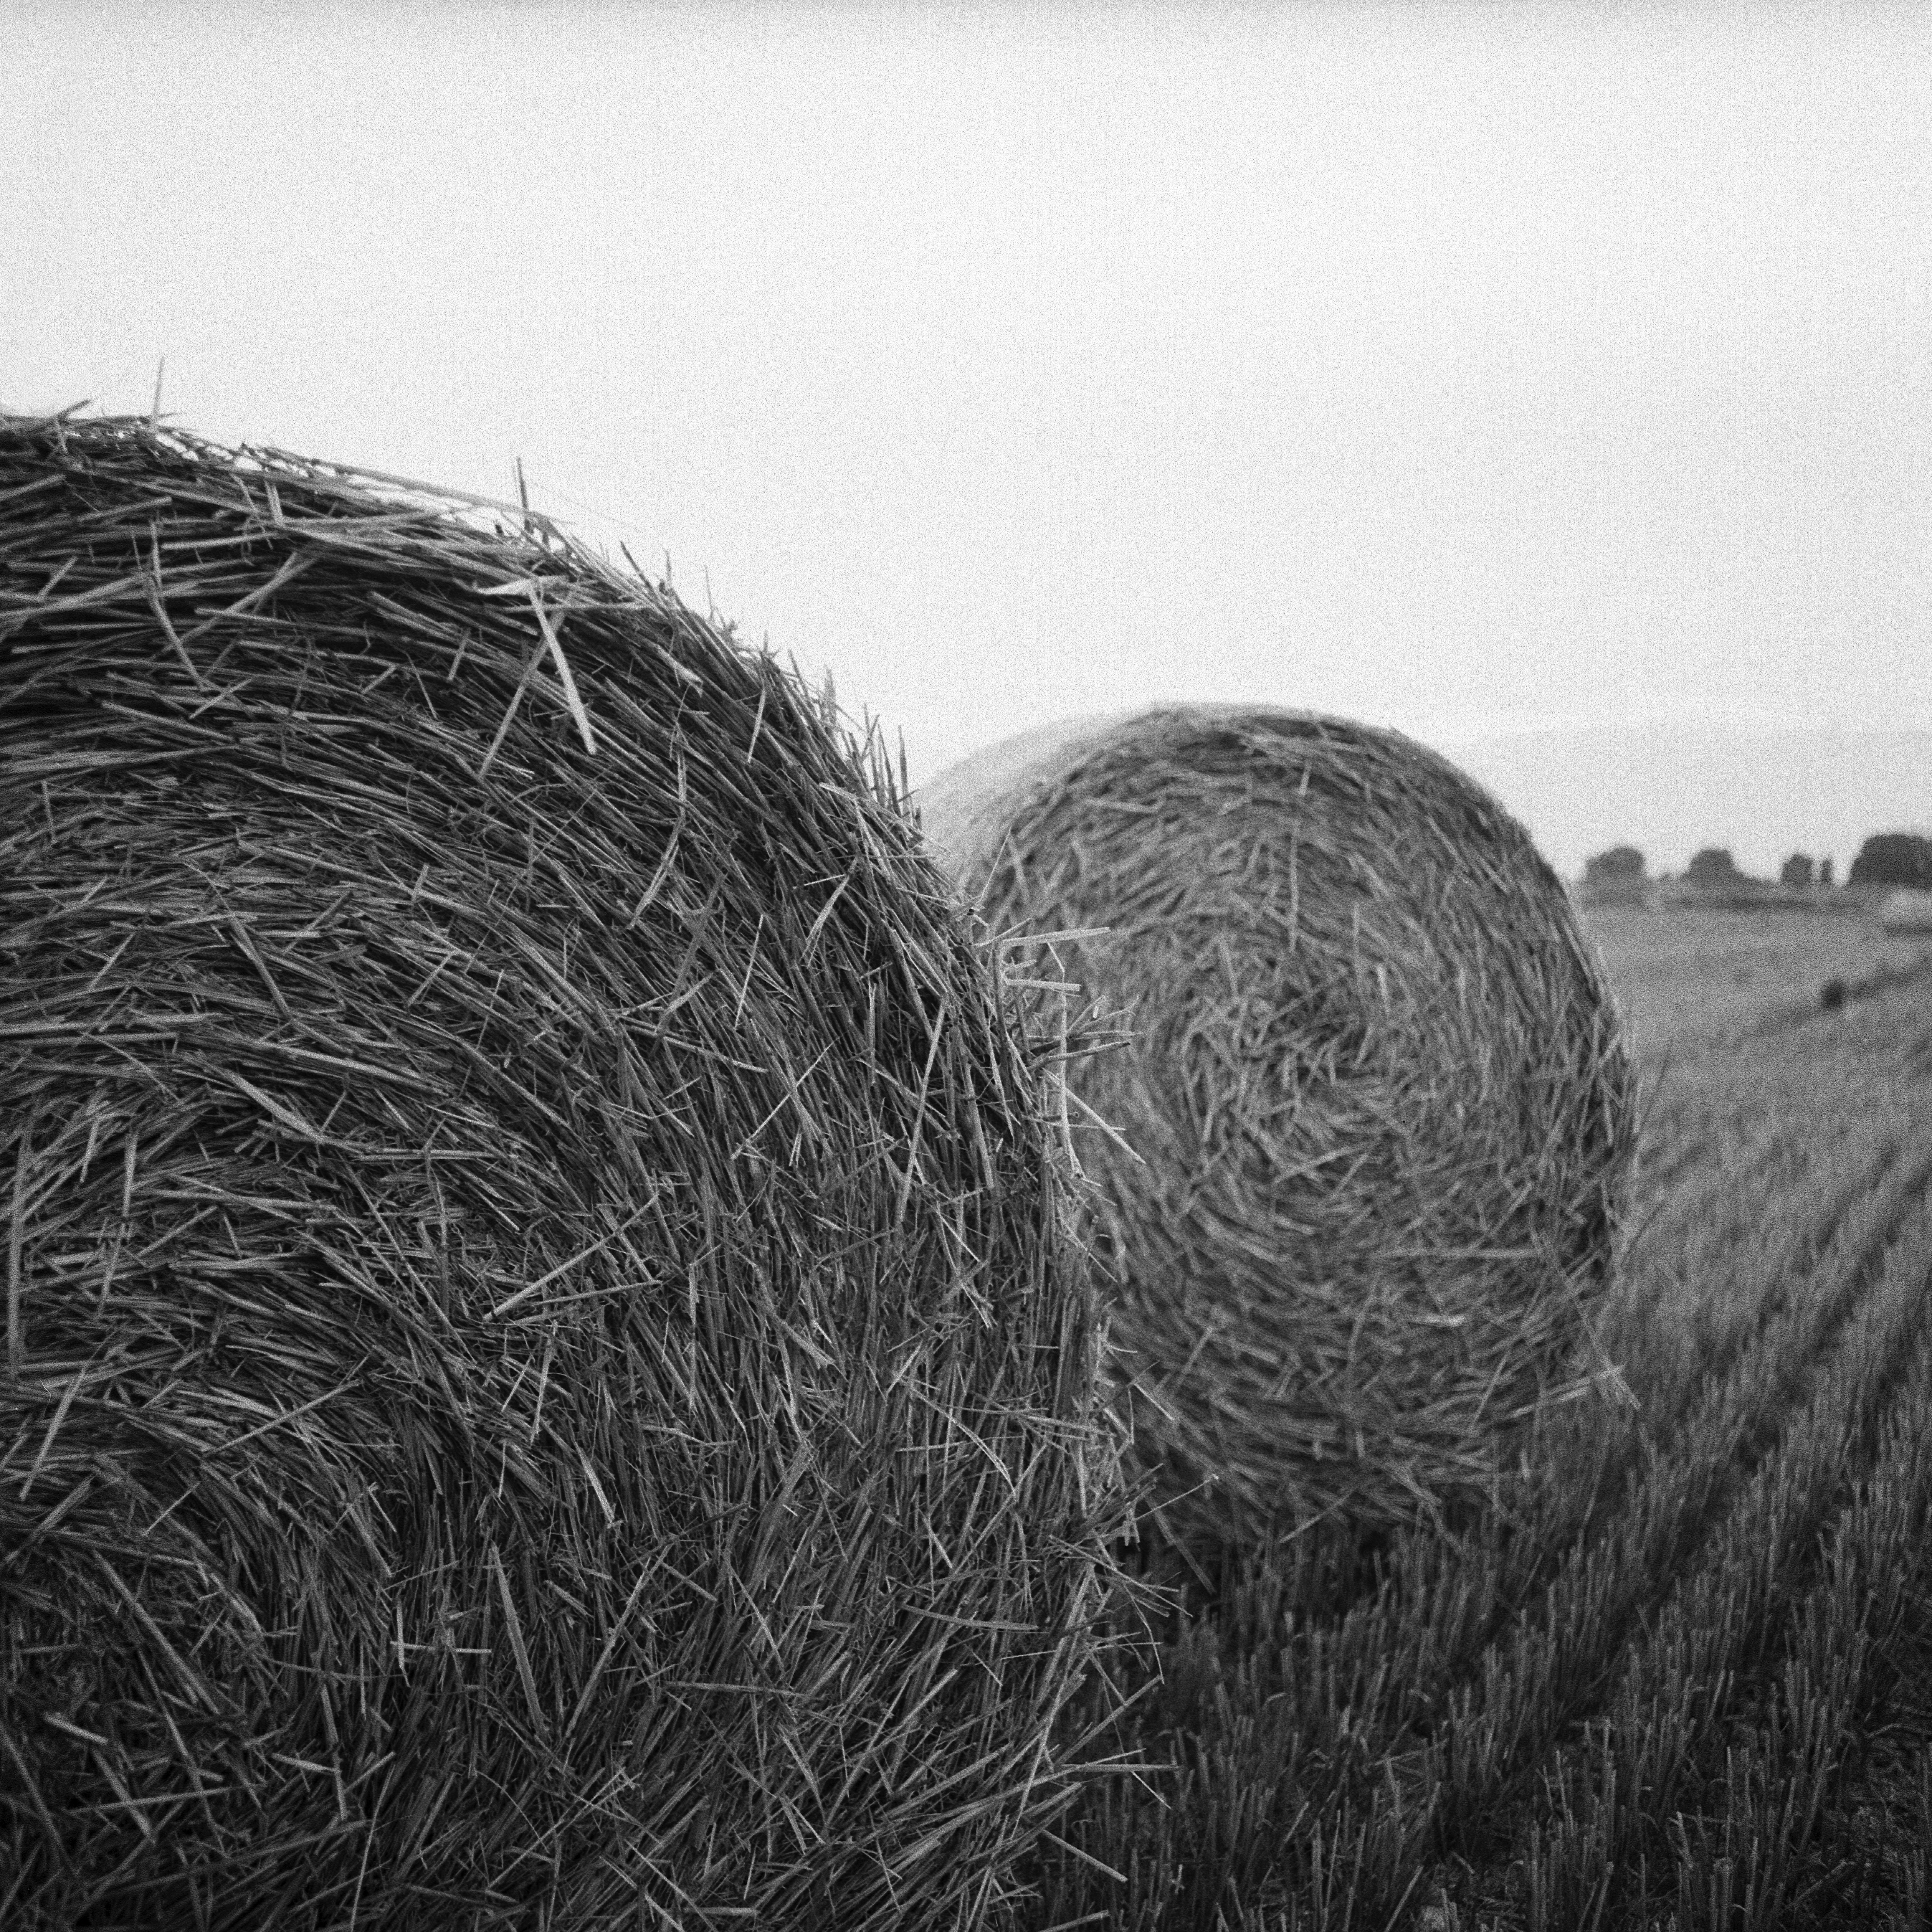 Gray scale photo of haystack on field